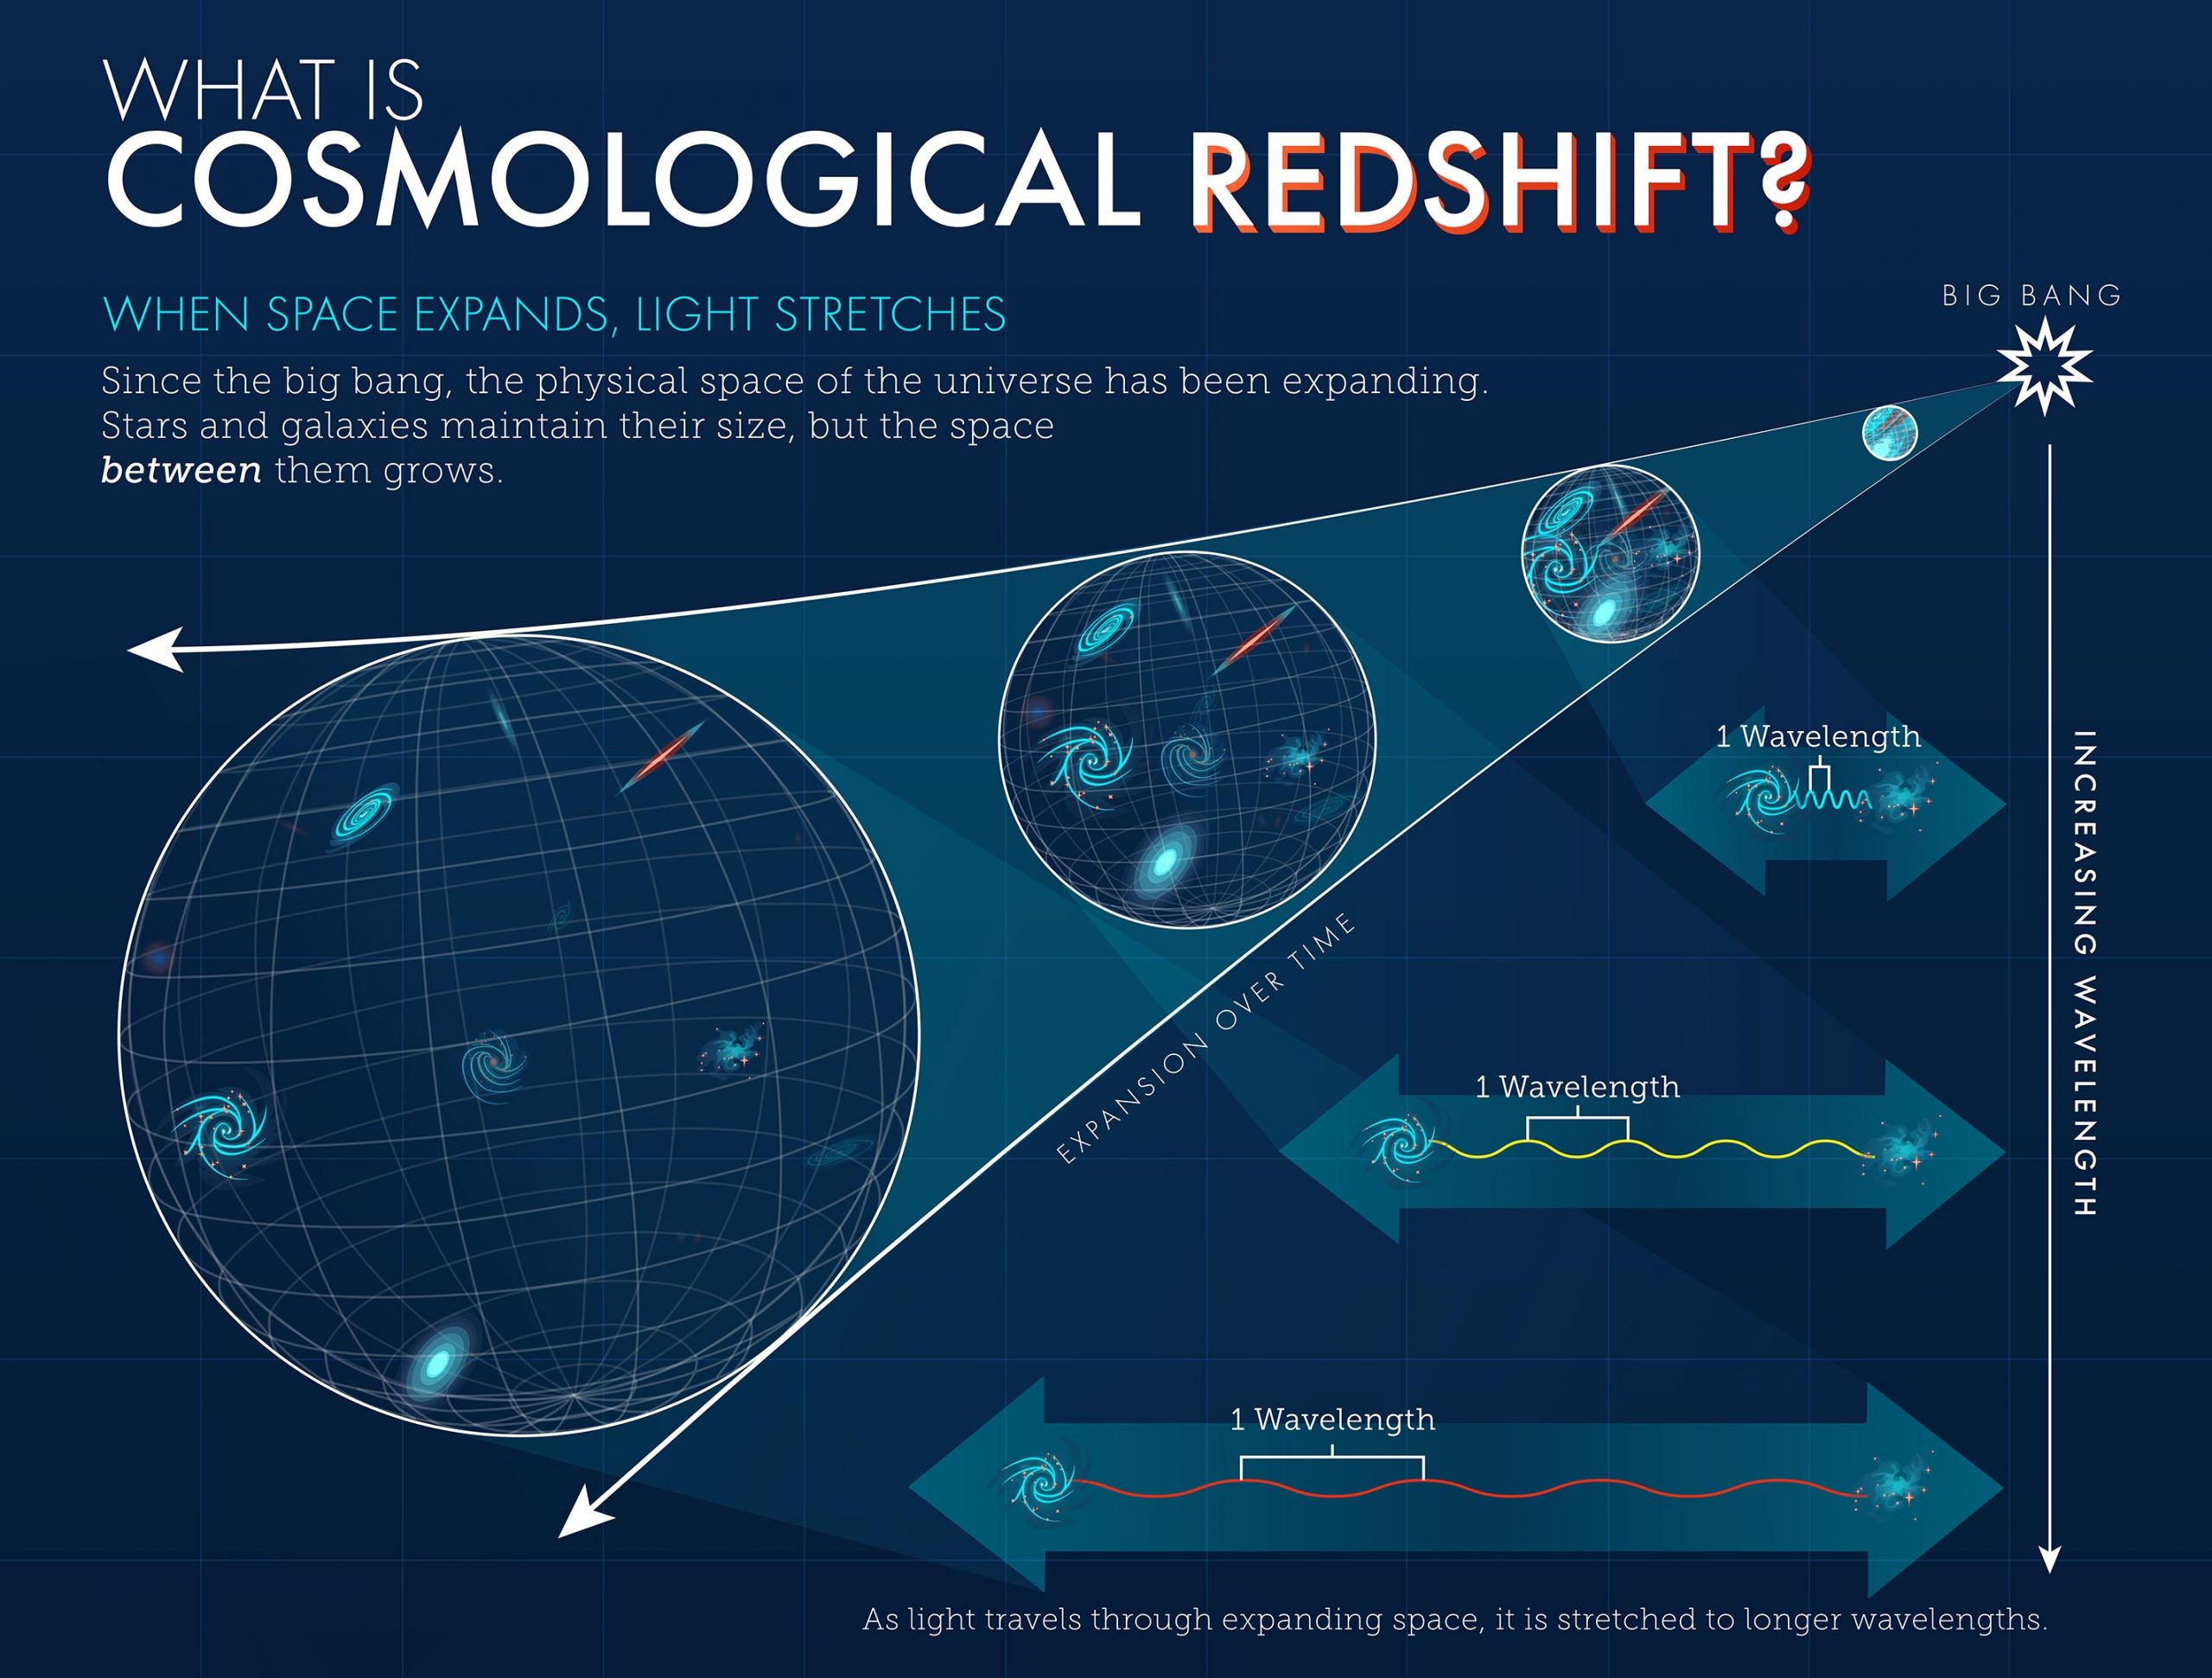 Astronomy Astrophysics What Is “Redshift?”